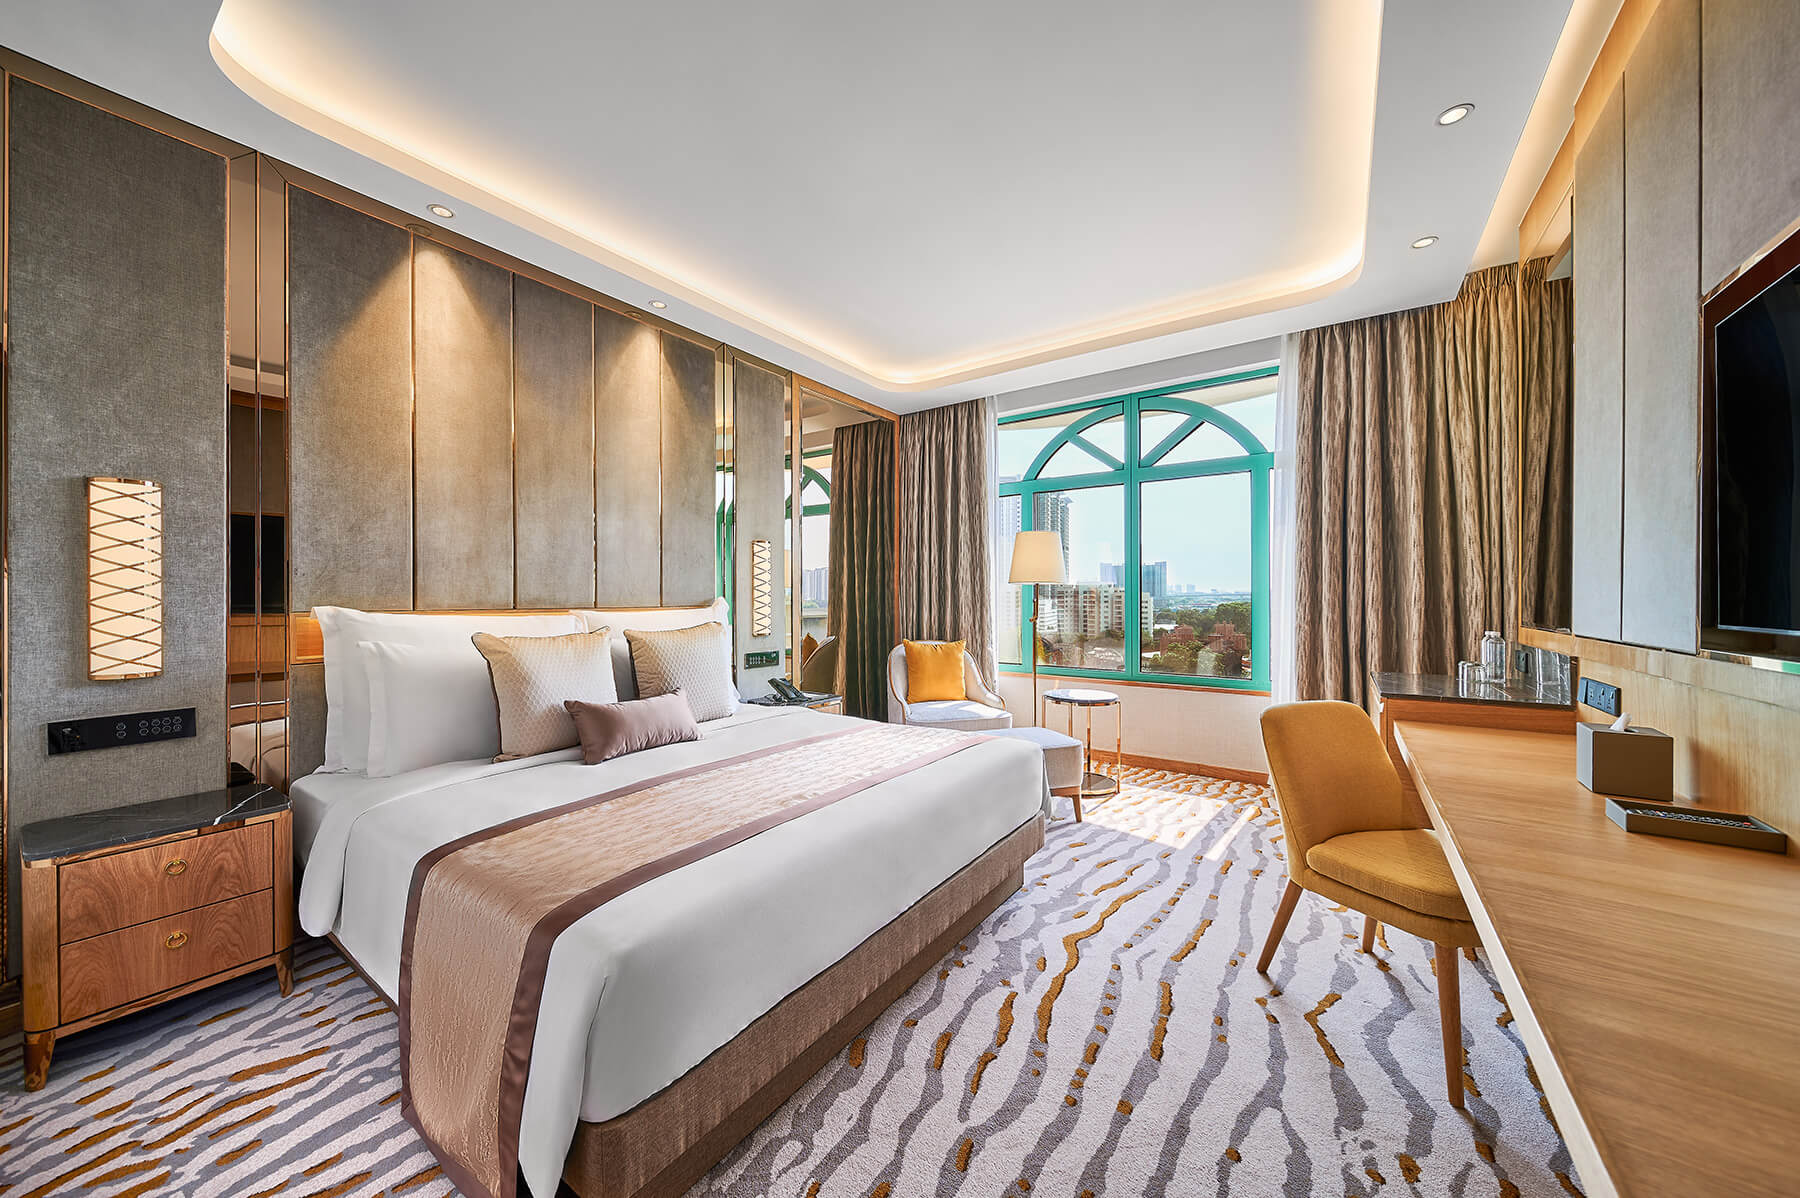 Escape relatives with a relaxing stay at Sunway Resort Hotel this Chinese New Year!